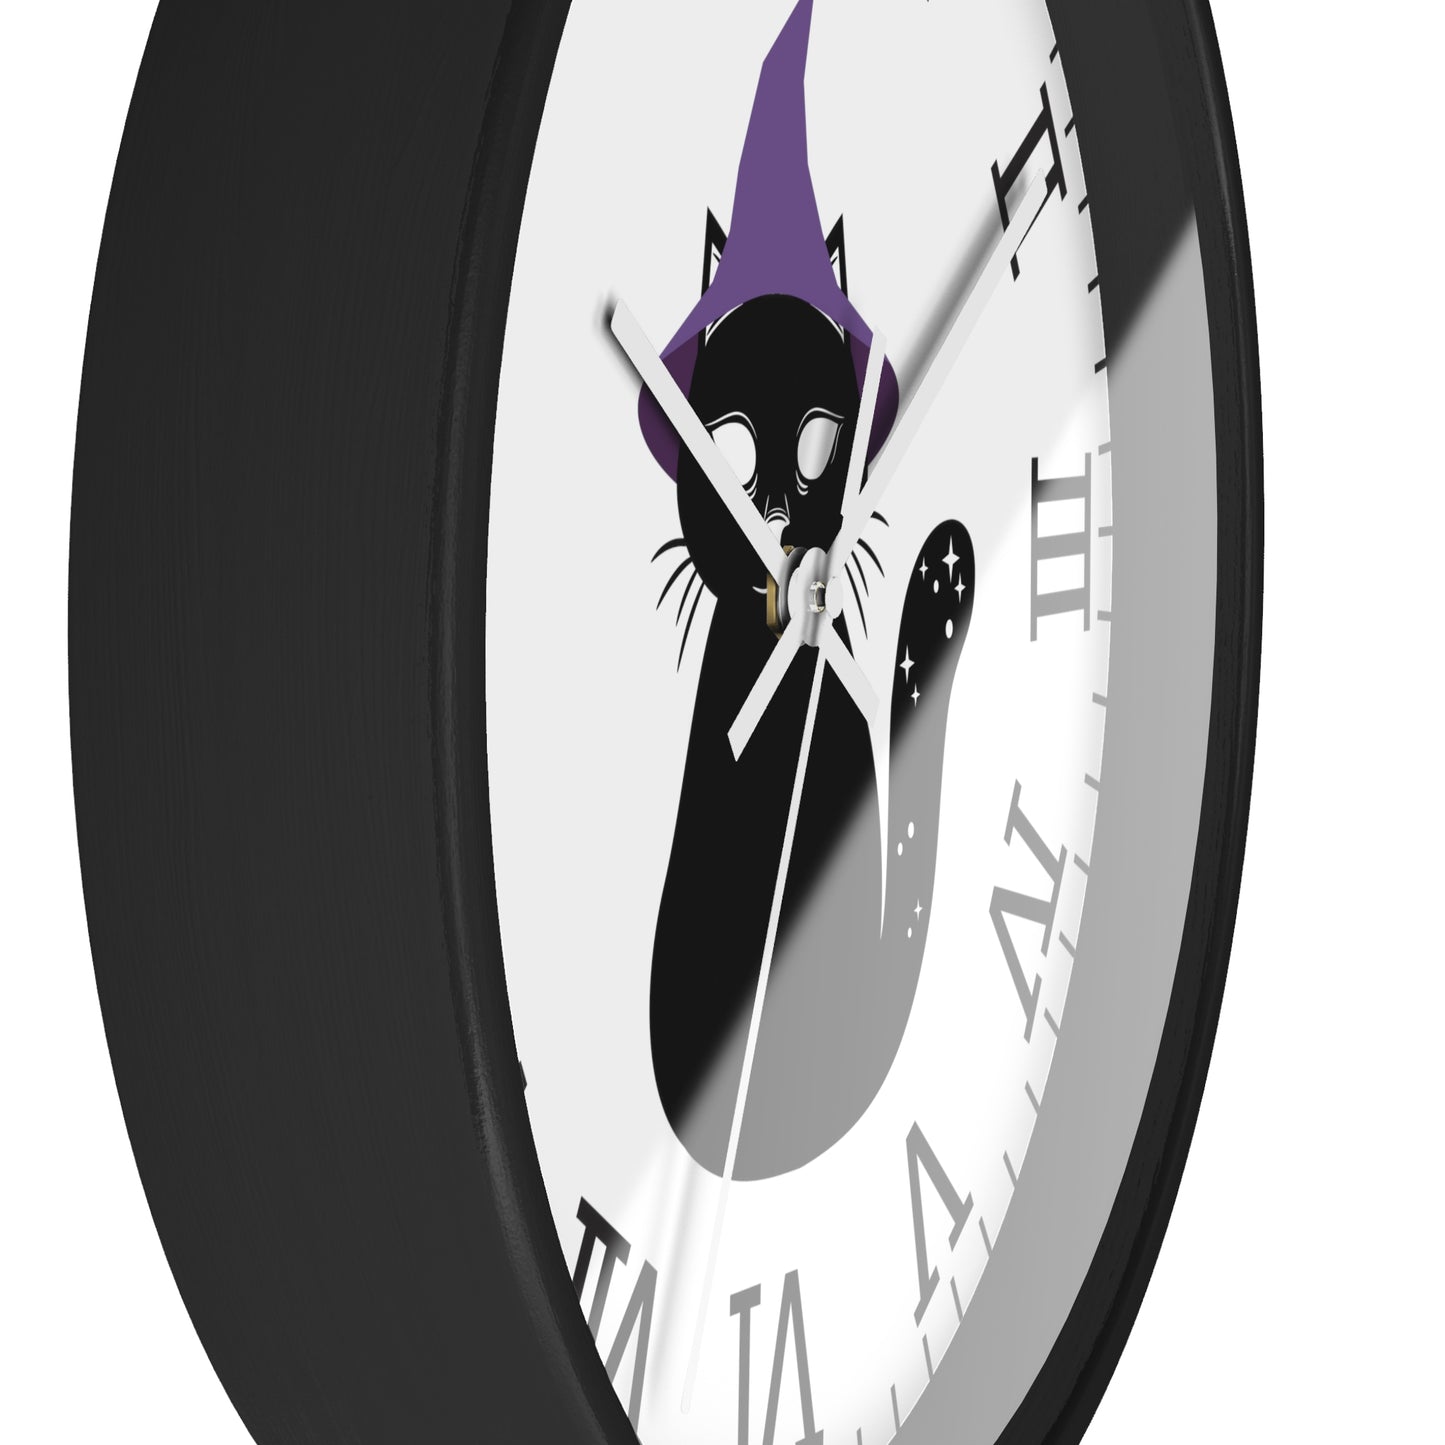 Spooky Black Cat Analog Wall Clock, Wood Frame,  Battery Operated, 10 inch, Black Cat with Purple Hat, Thanksgiving or any fall theme decor